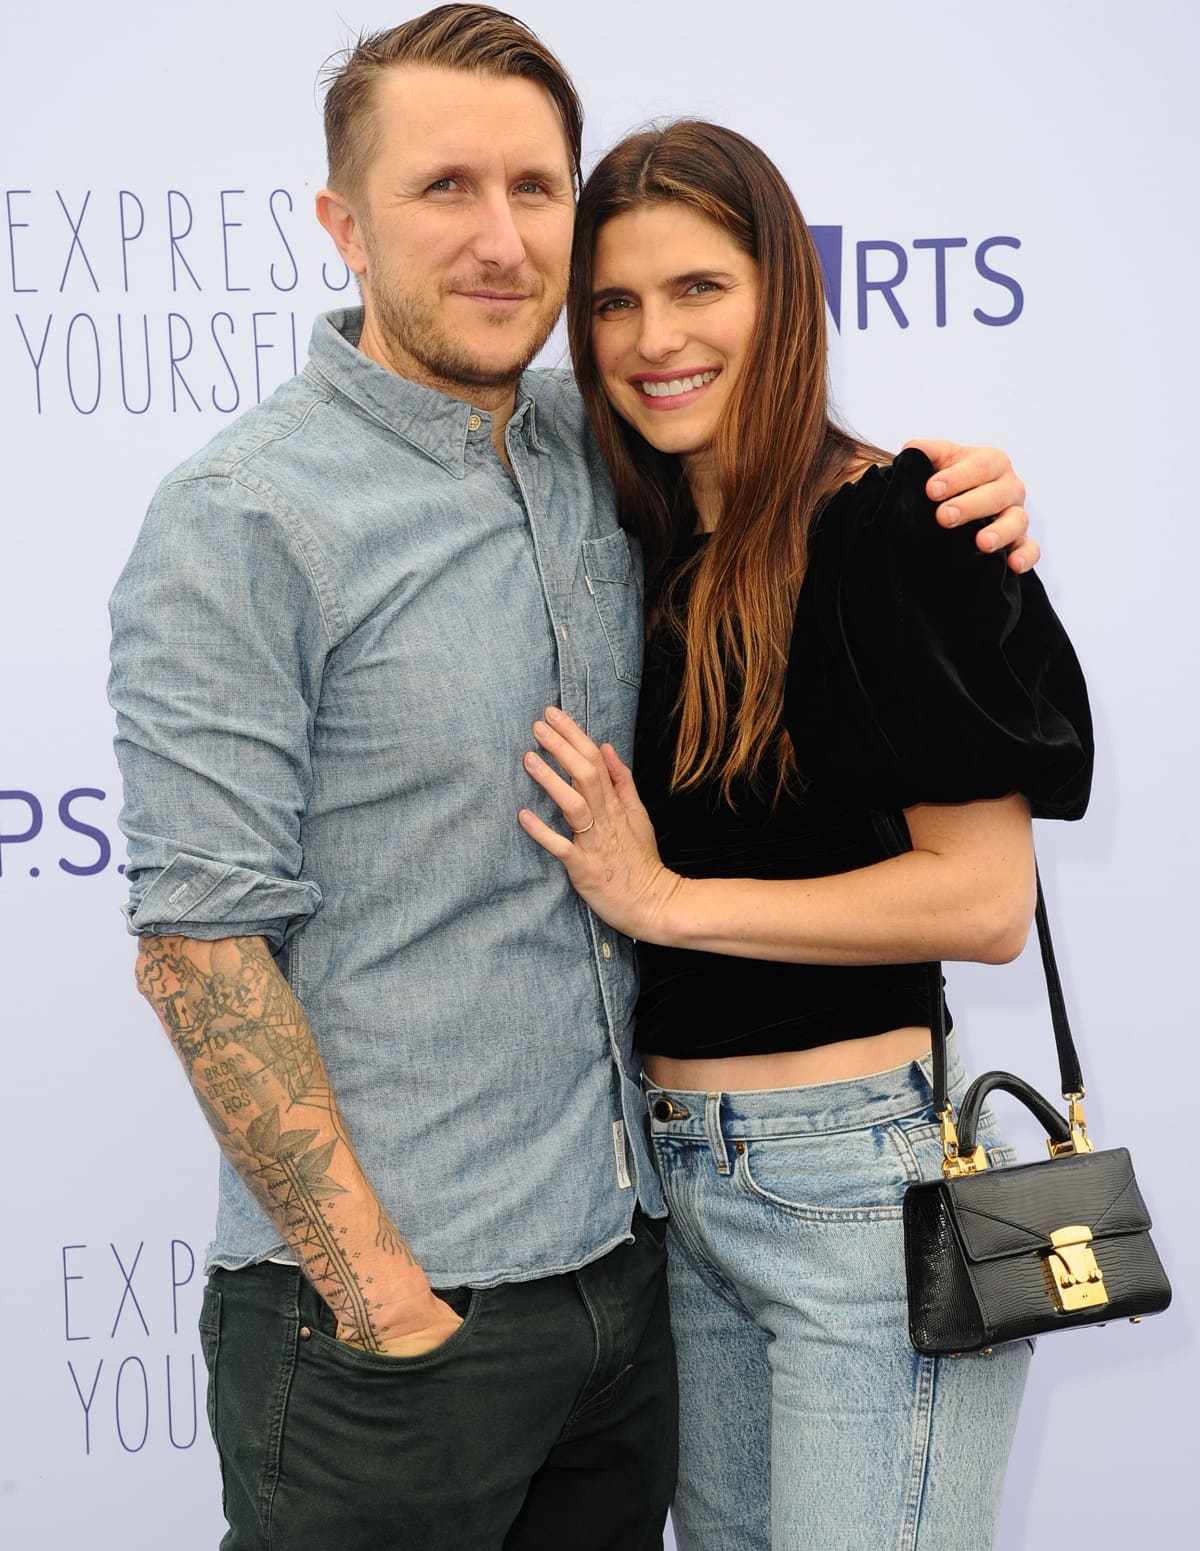 Scott Campbell and Lake Bell in the P.S. Arts Express Yourself Event